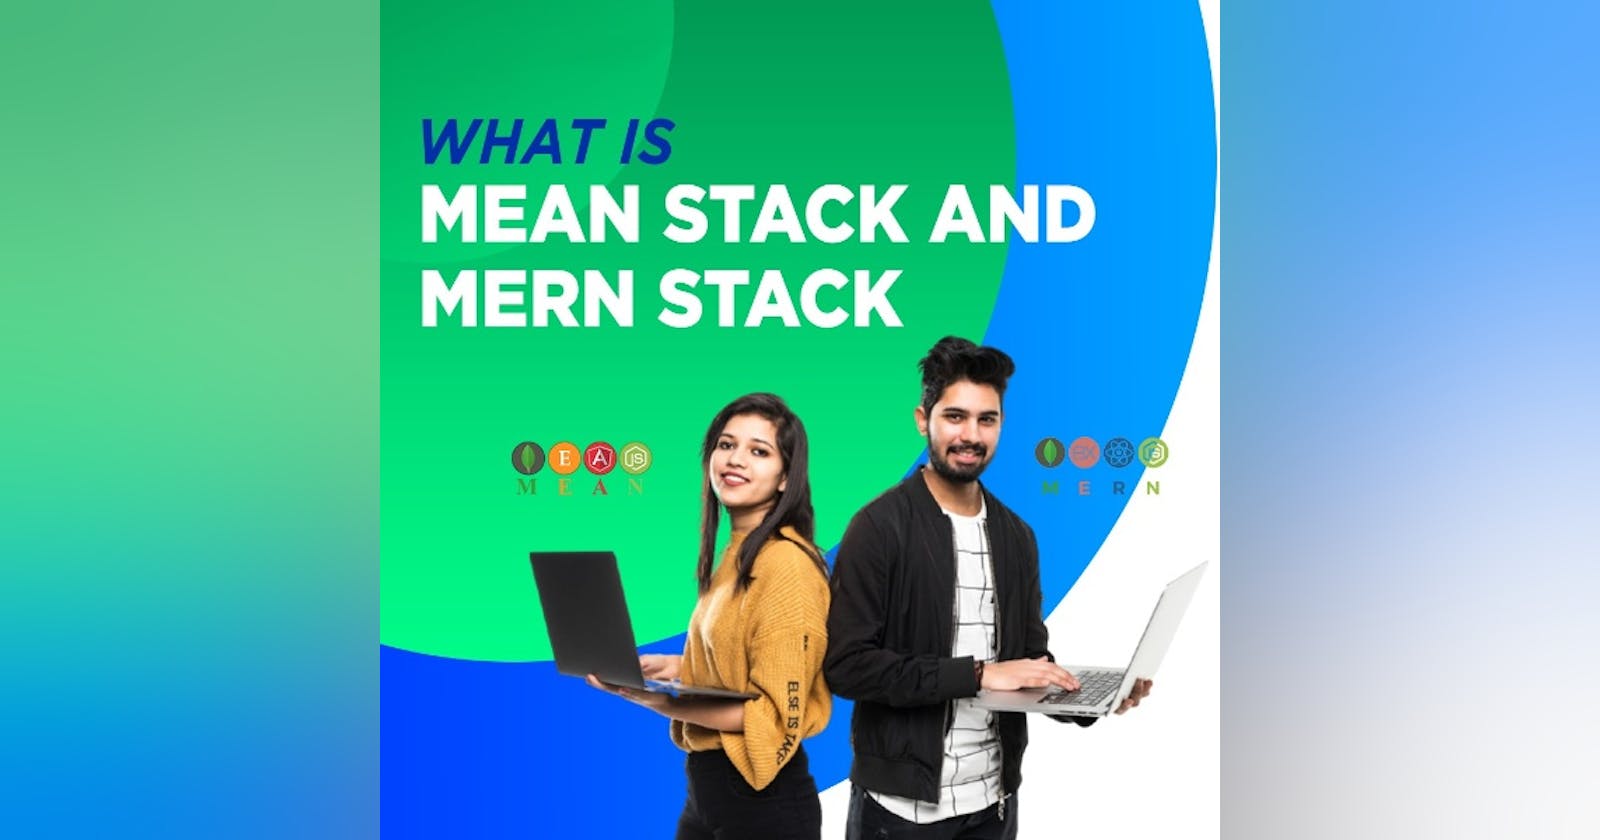 What Is MEAN Stack And MERN Stack?